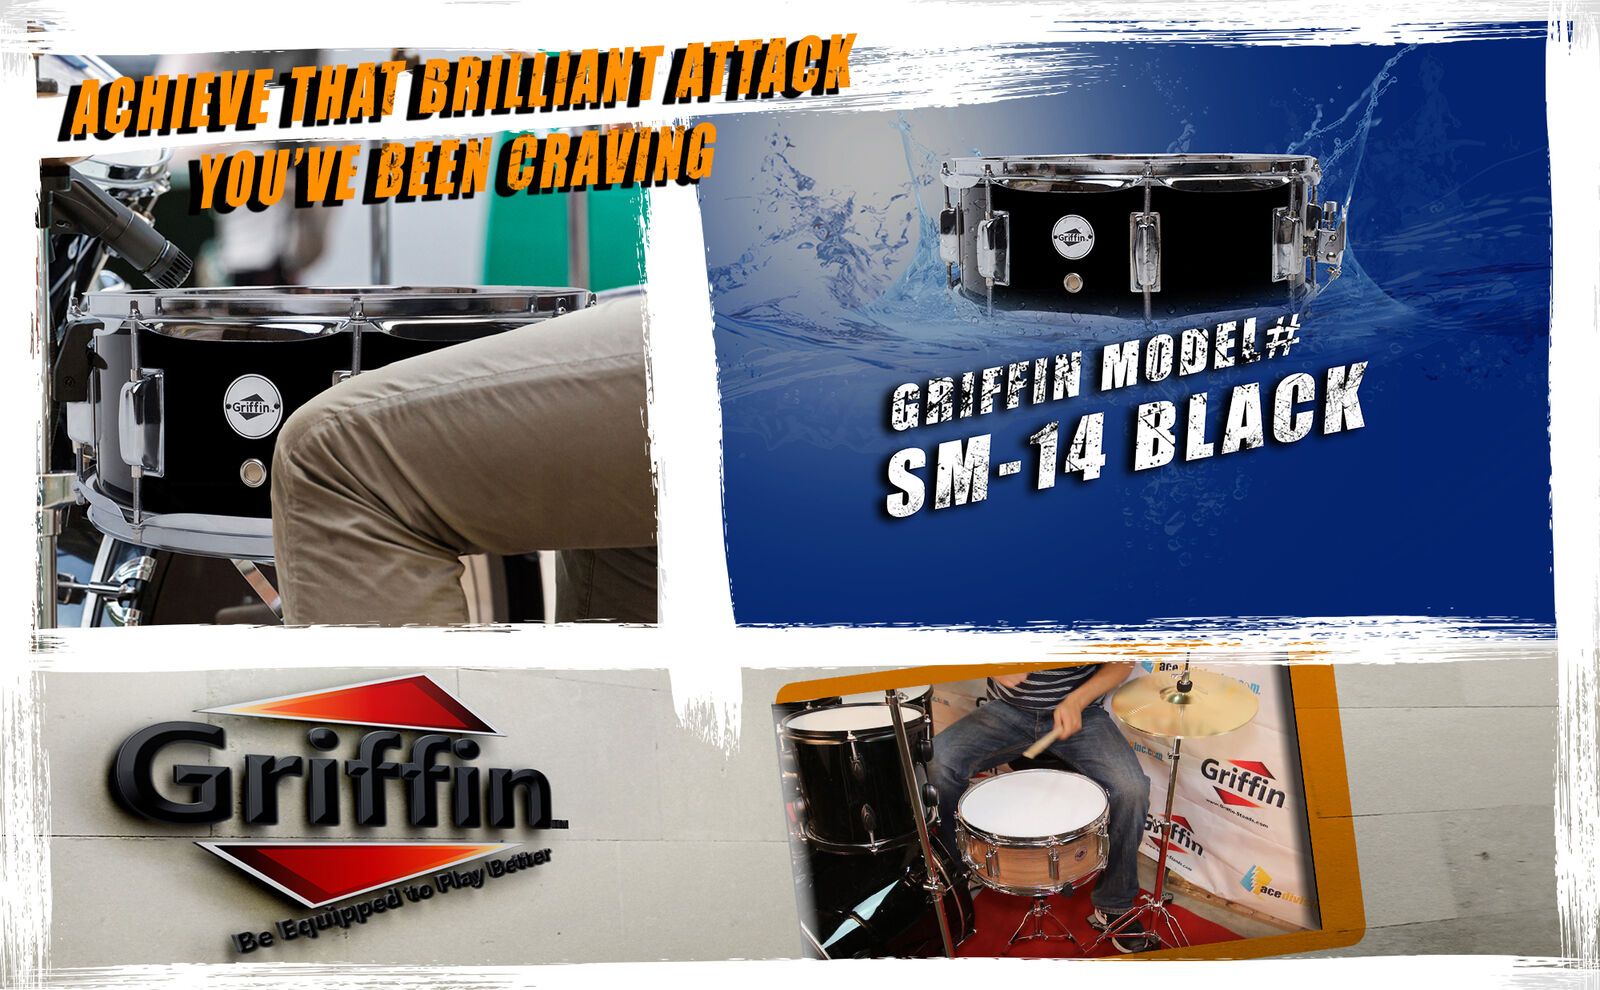 GRIFFIN Snare Drum – Black 14″x5.5 Poplar Wood Shell Acoustic Percussion Kit Set 8